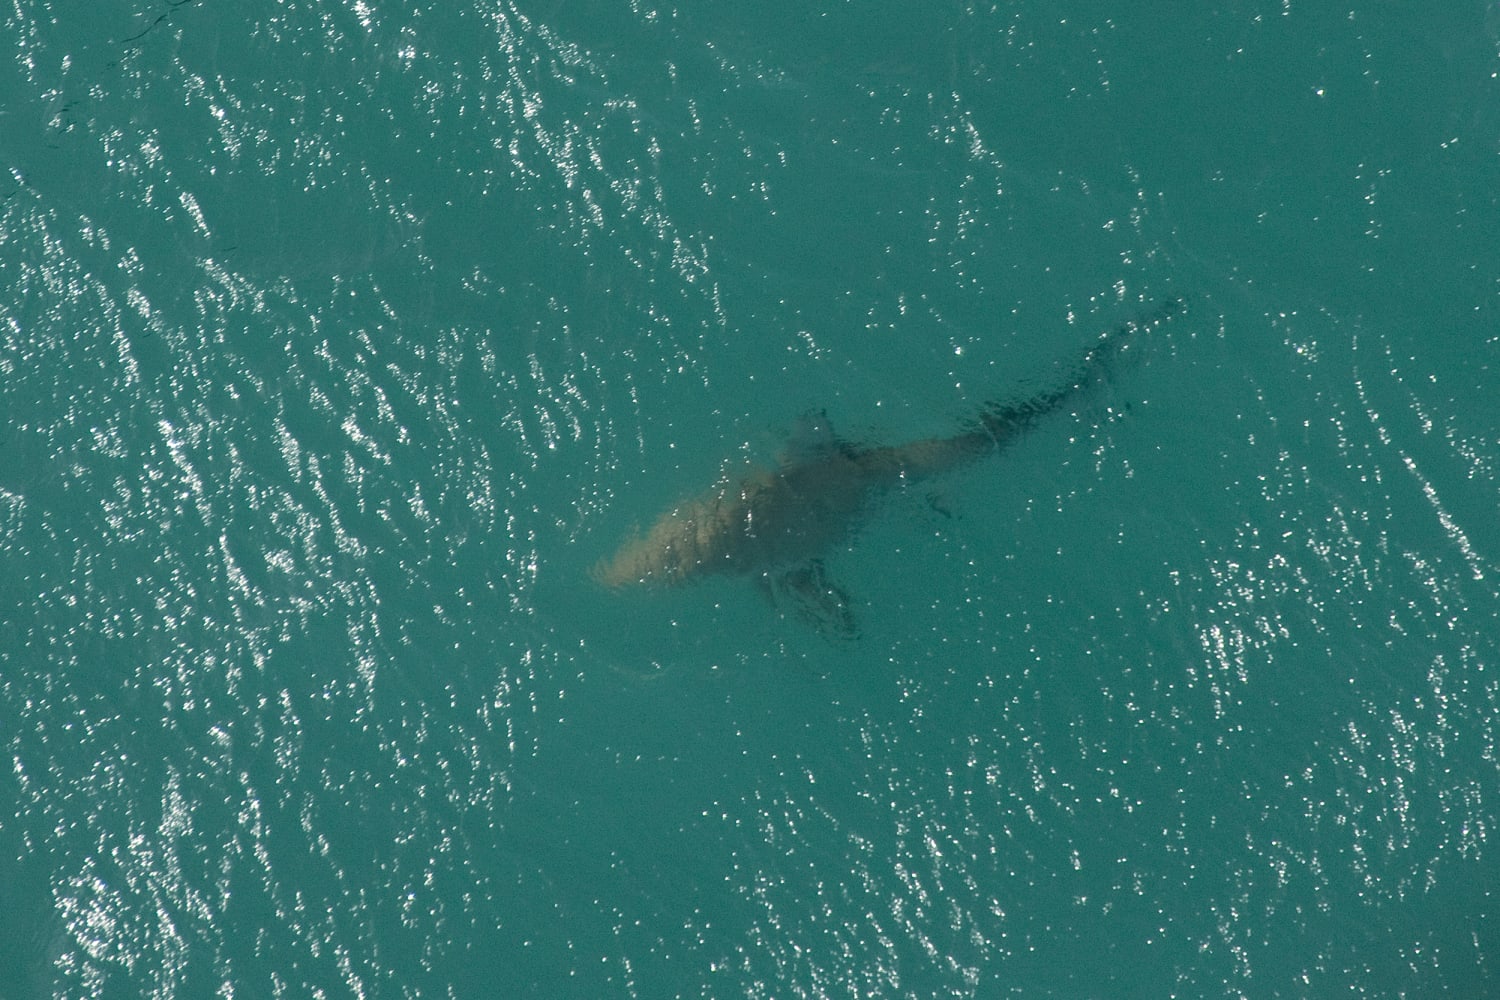 Multiple shark bites reported off New York coast in two days